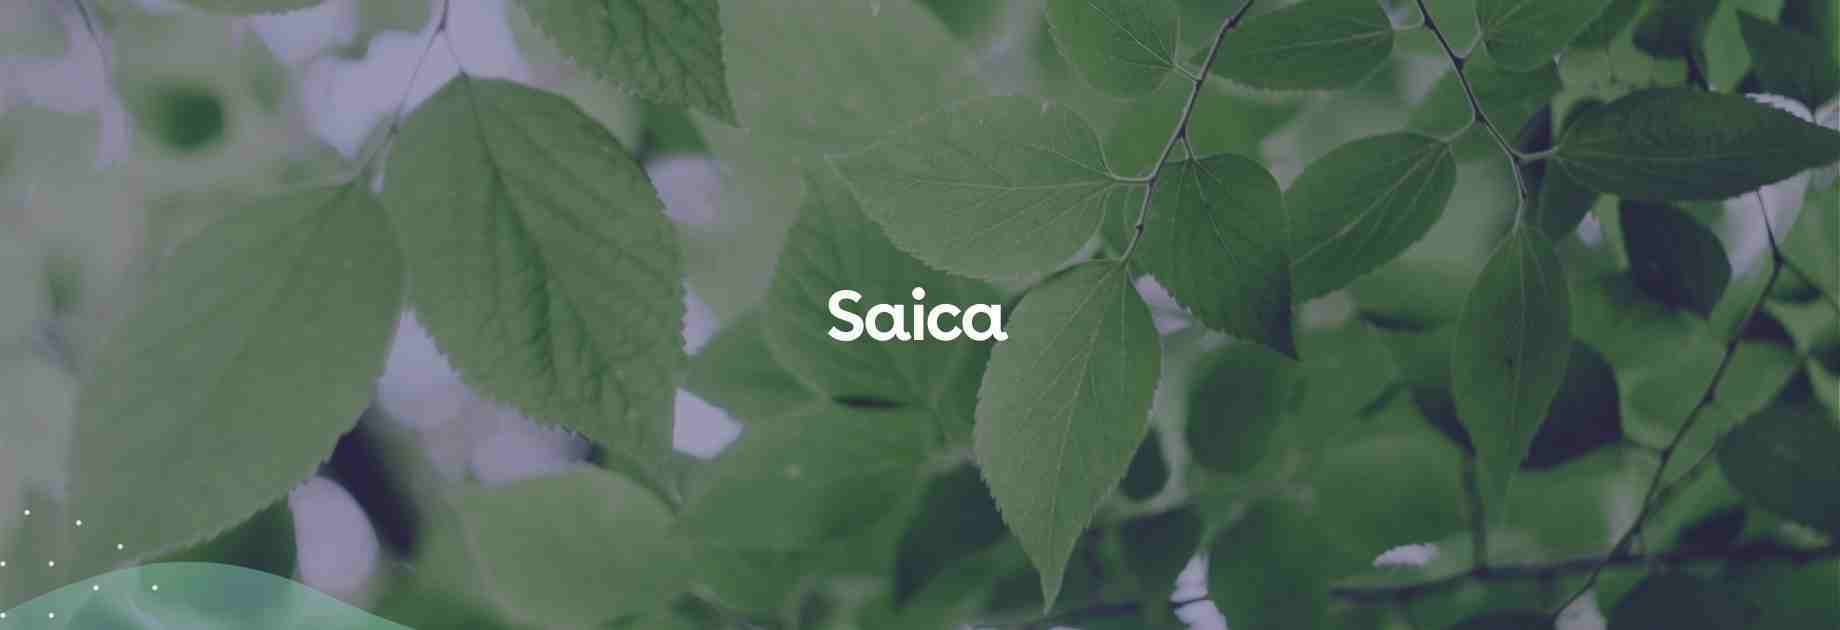 Saica with Green leaves